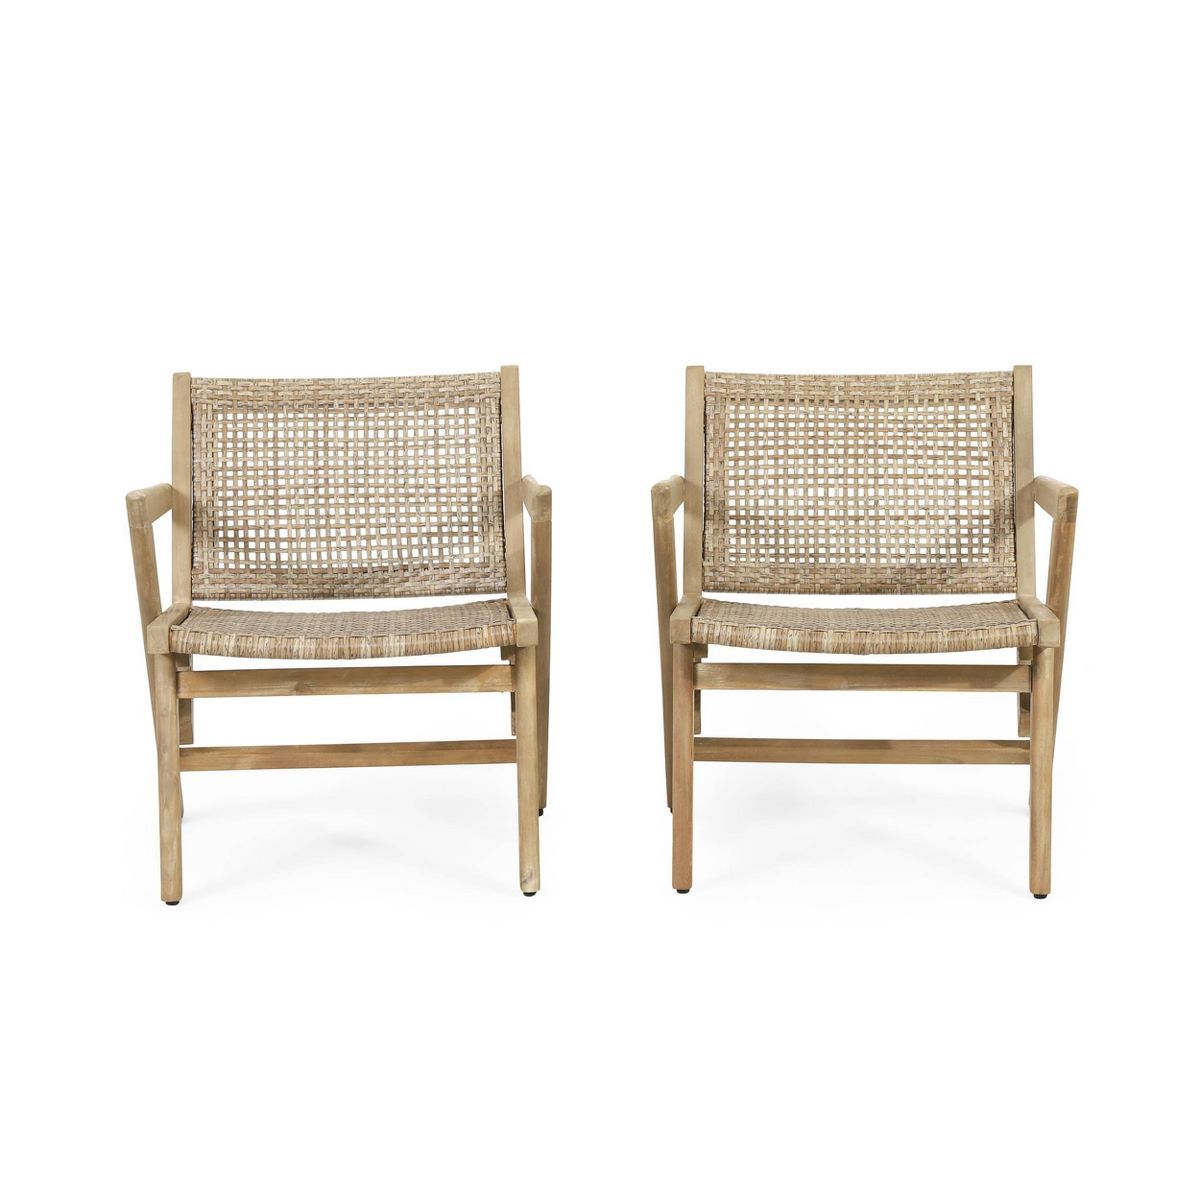 2pk Baxton Outdoor Wicker Club Chairs Light Brown/Brown - Christopher Knight Home | Target